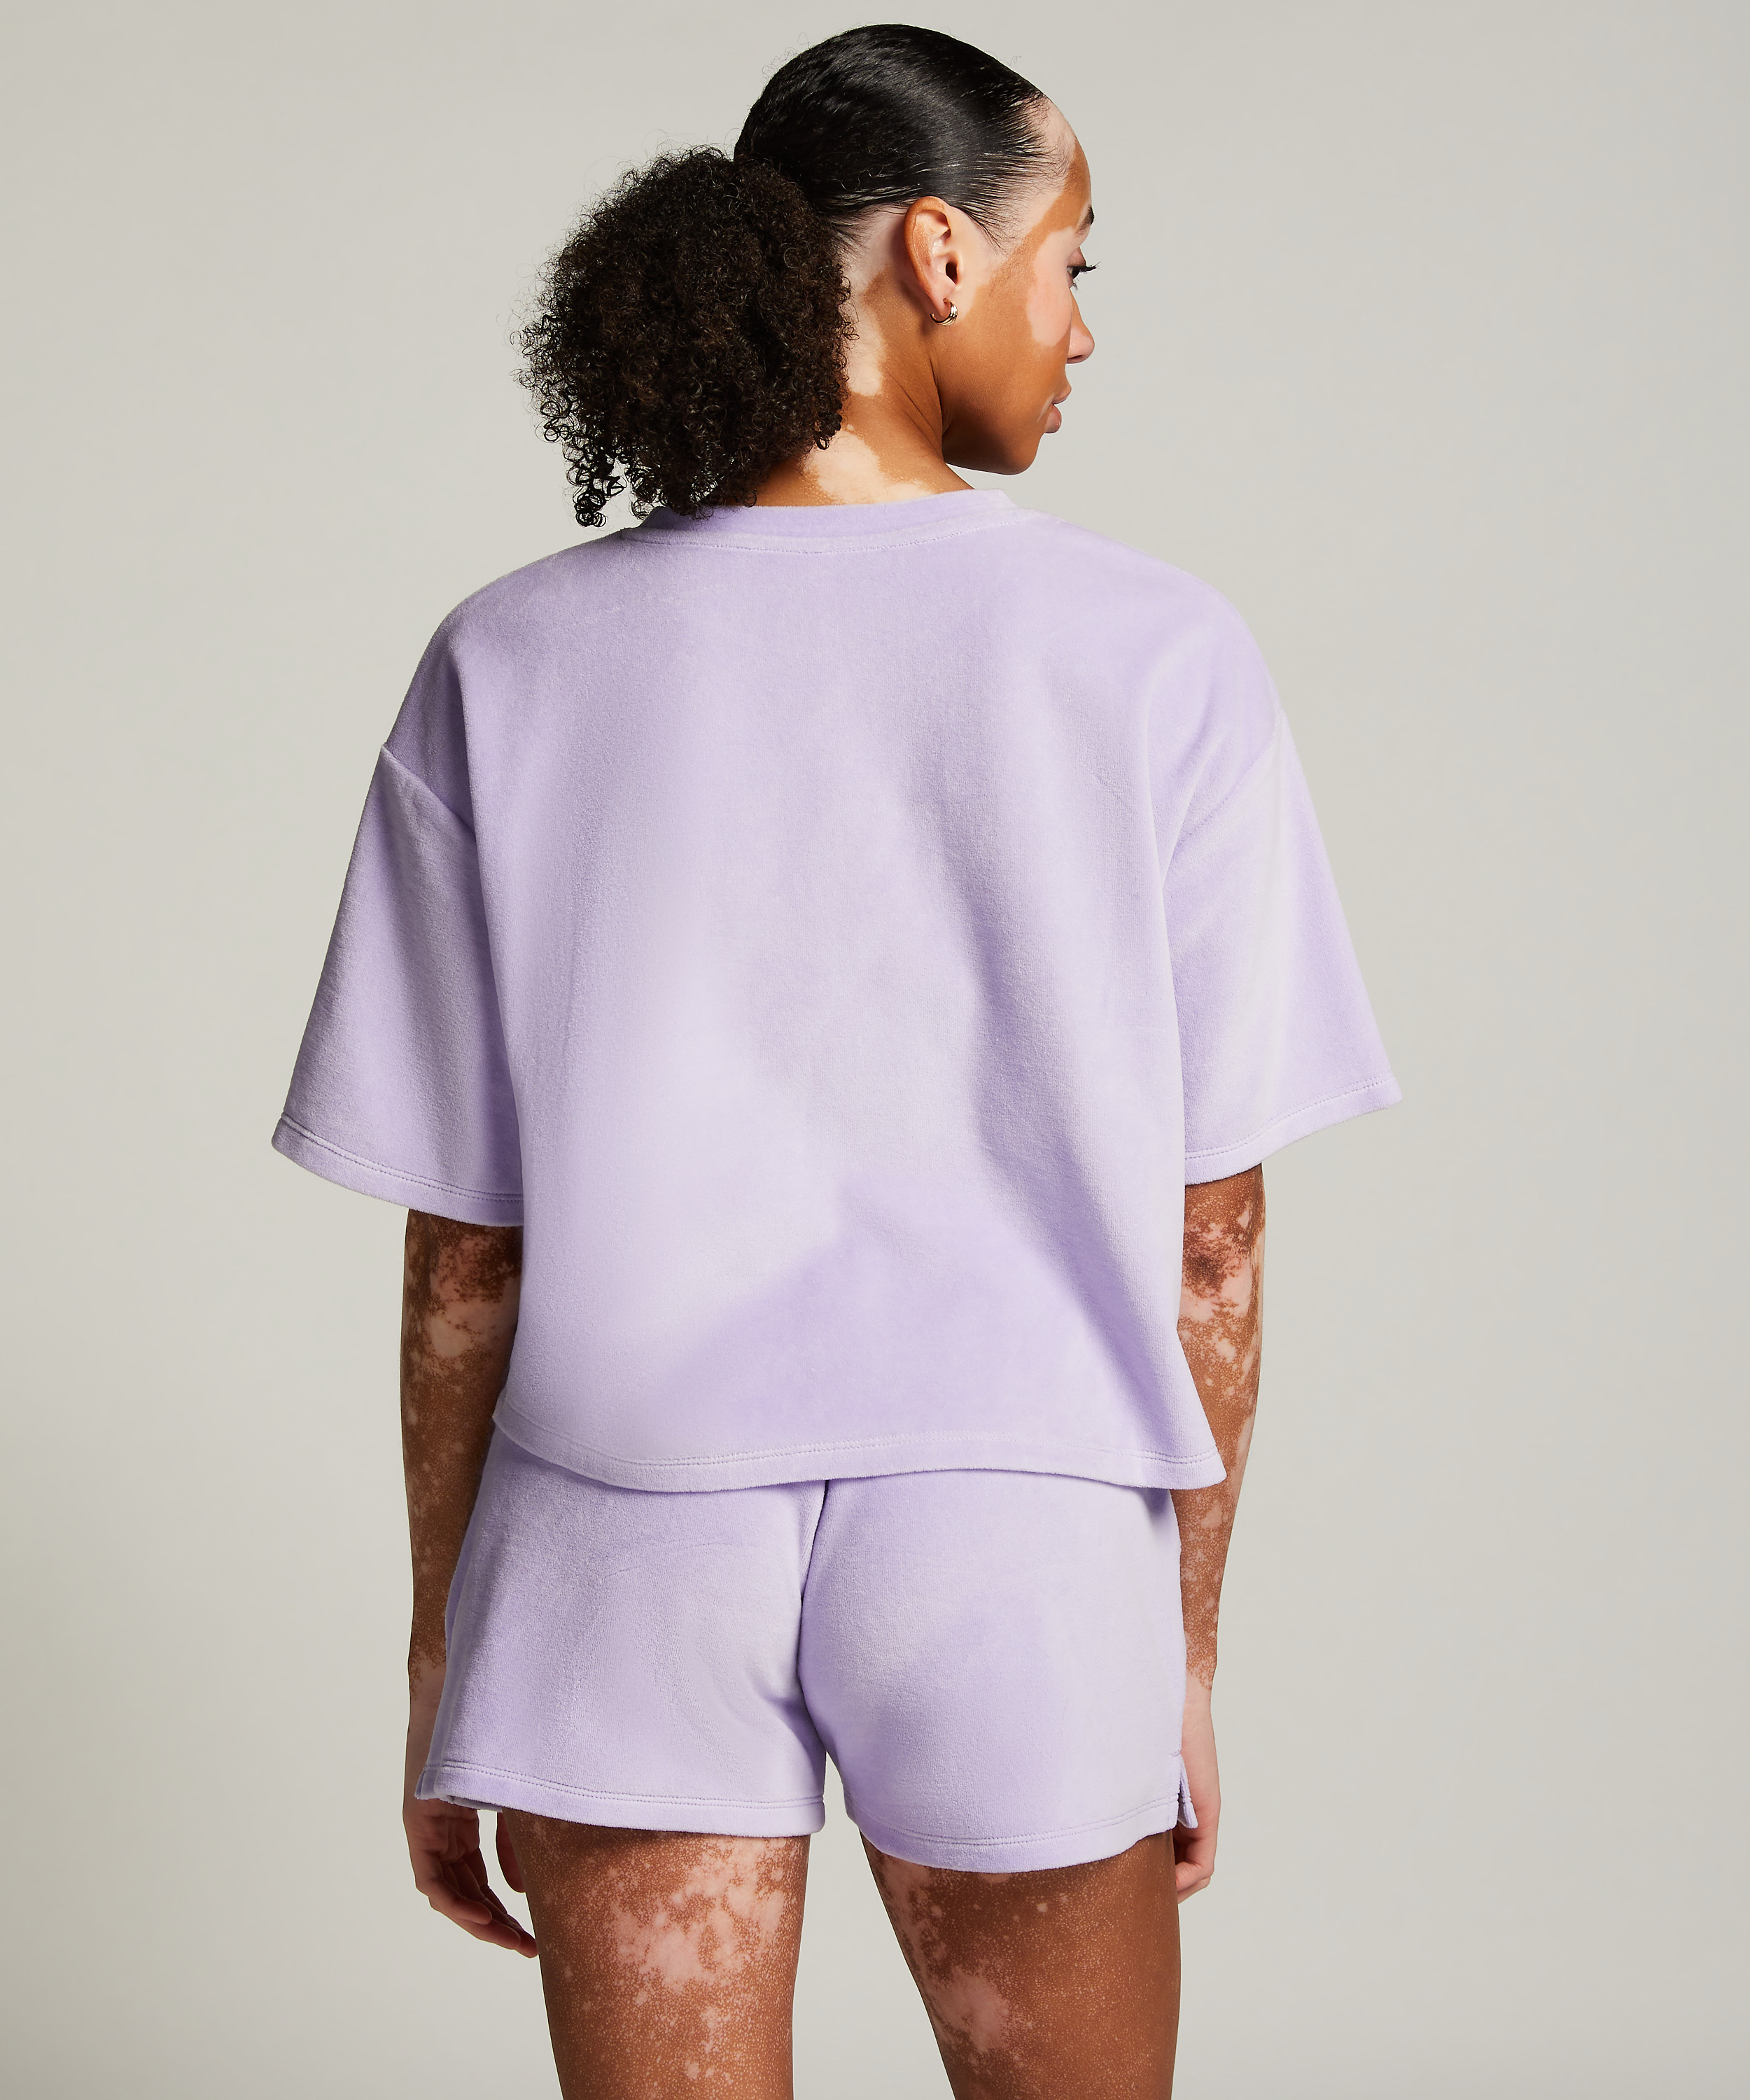 Short-sleeve velours top, Fioletowy, main